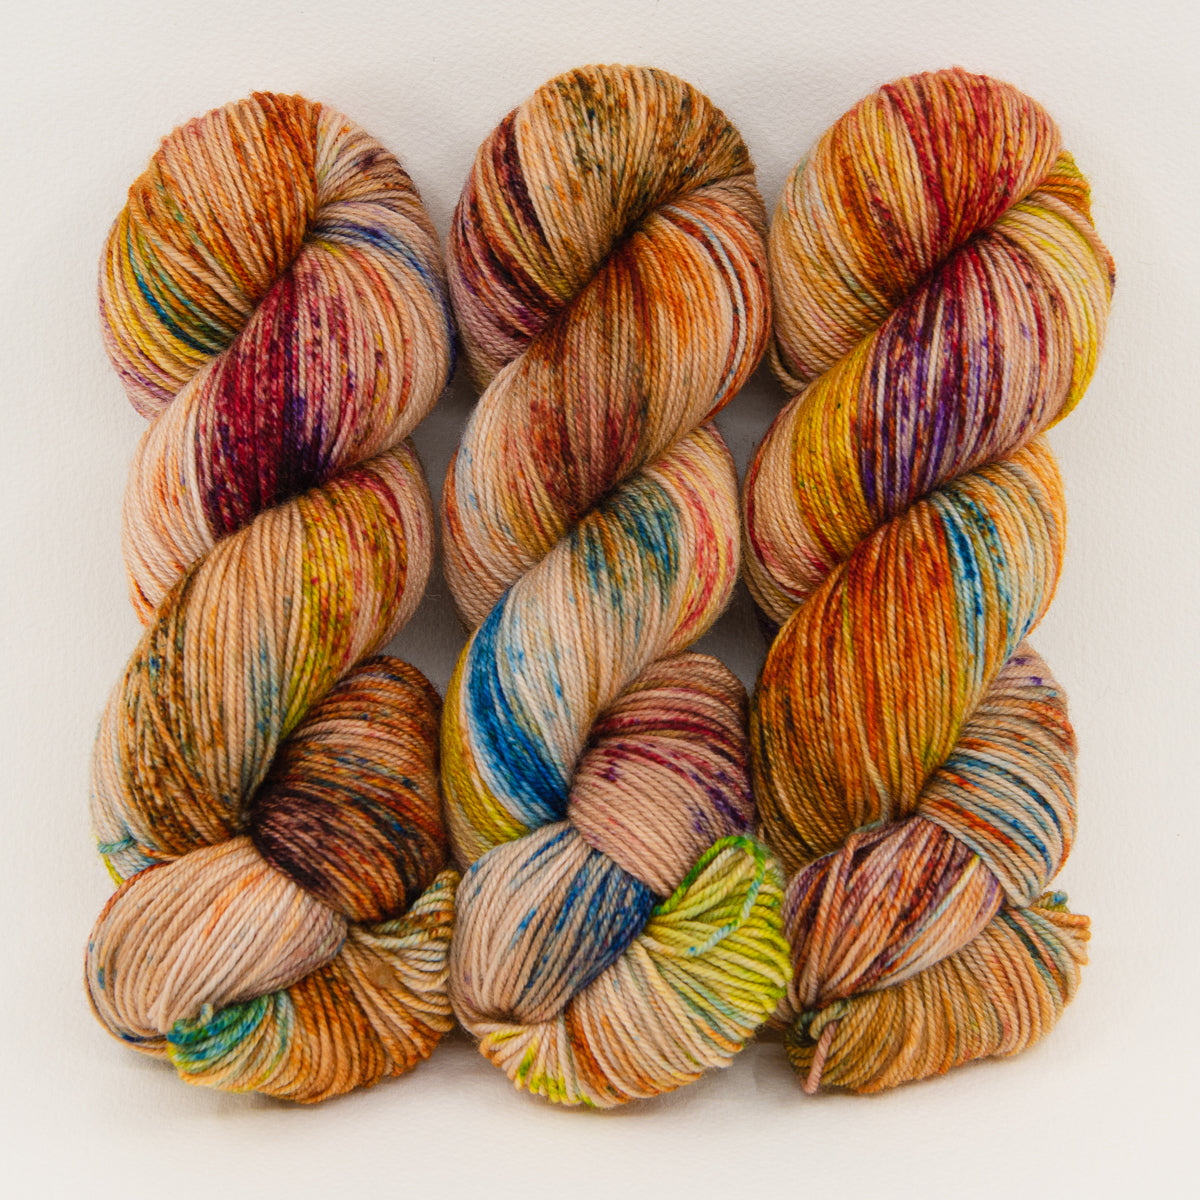 Autumn Leaves in Worsted Weight